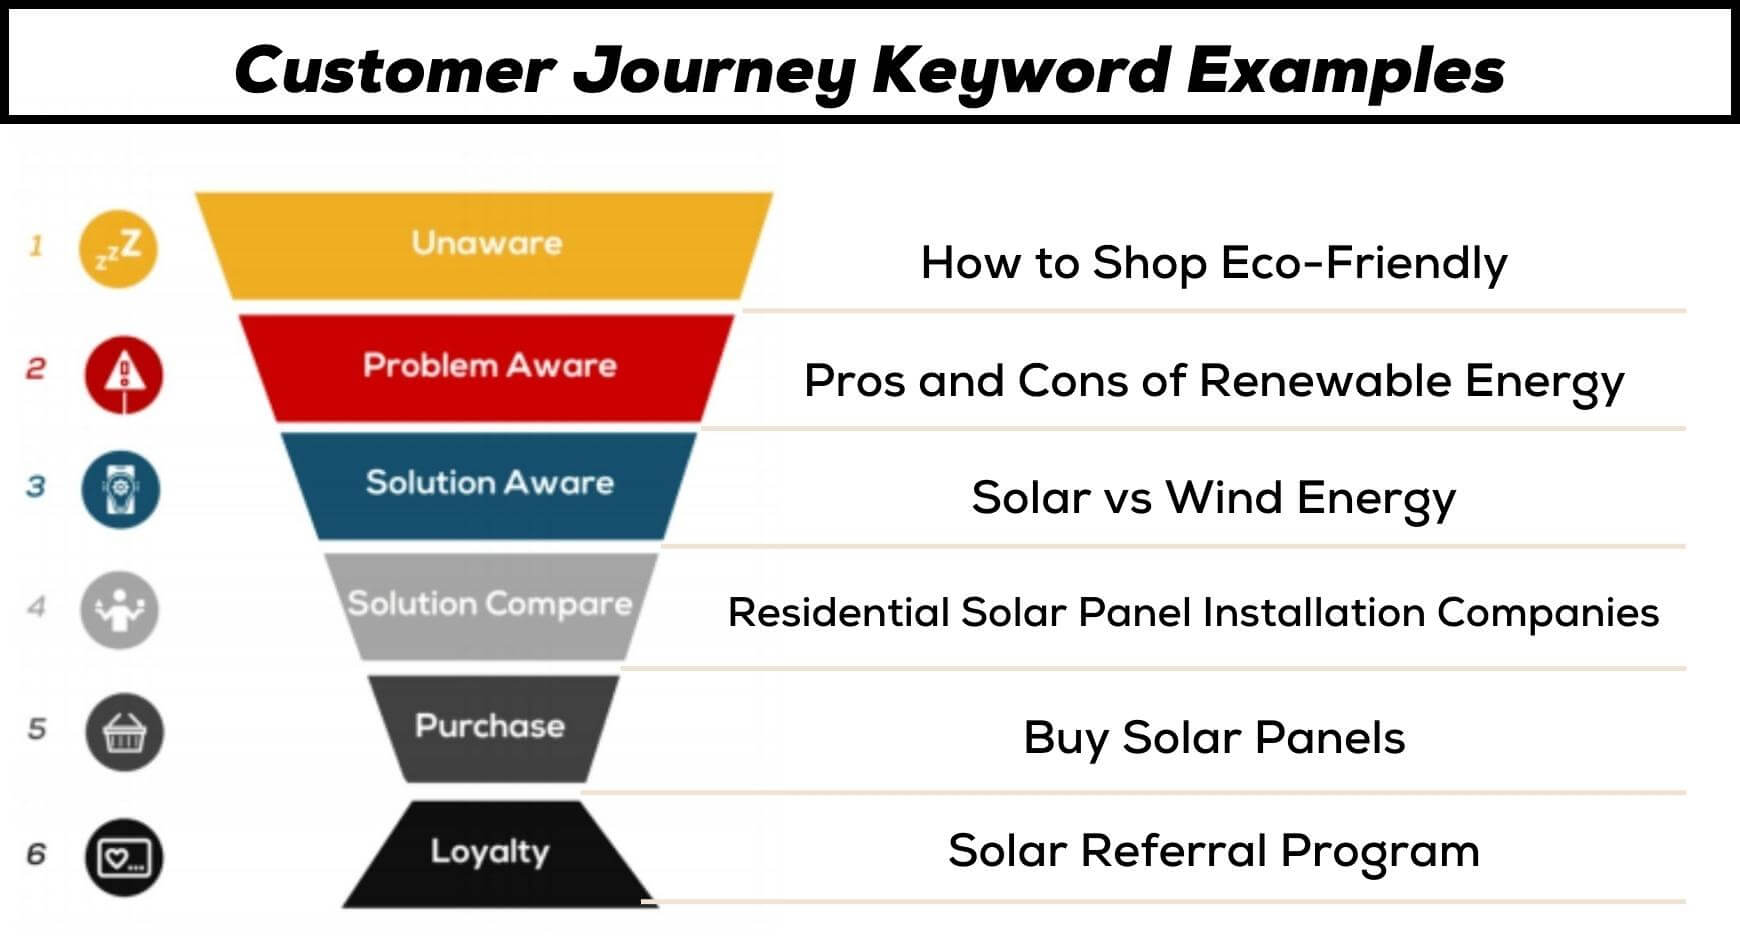 examples of keywords that fit into different stages of the customer journey